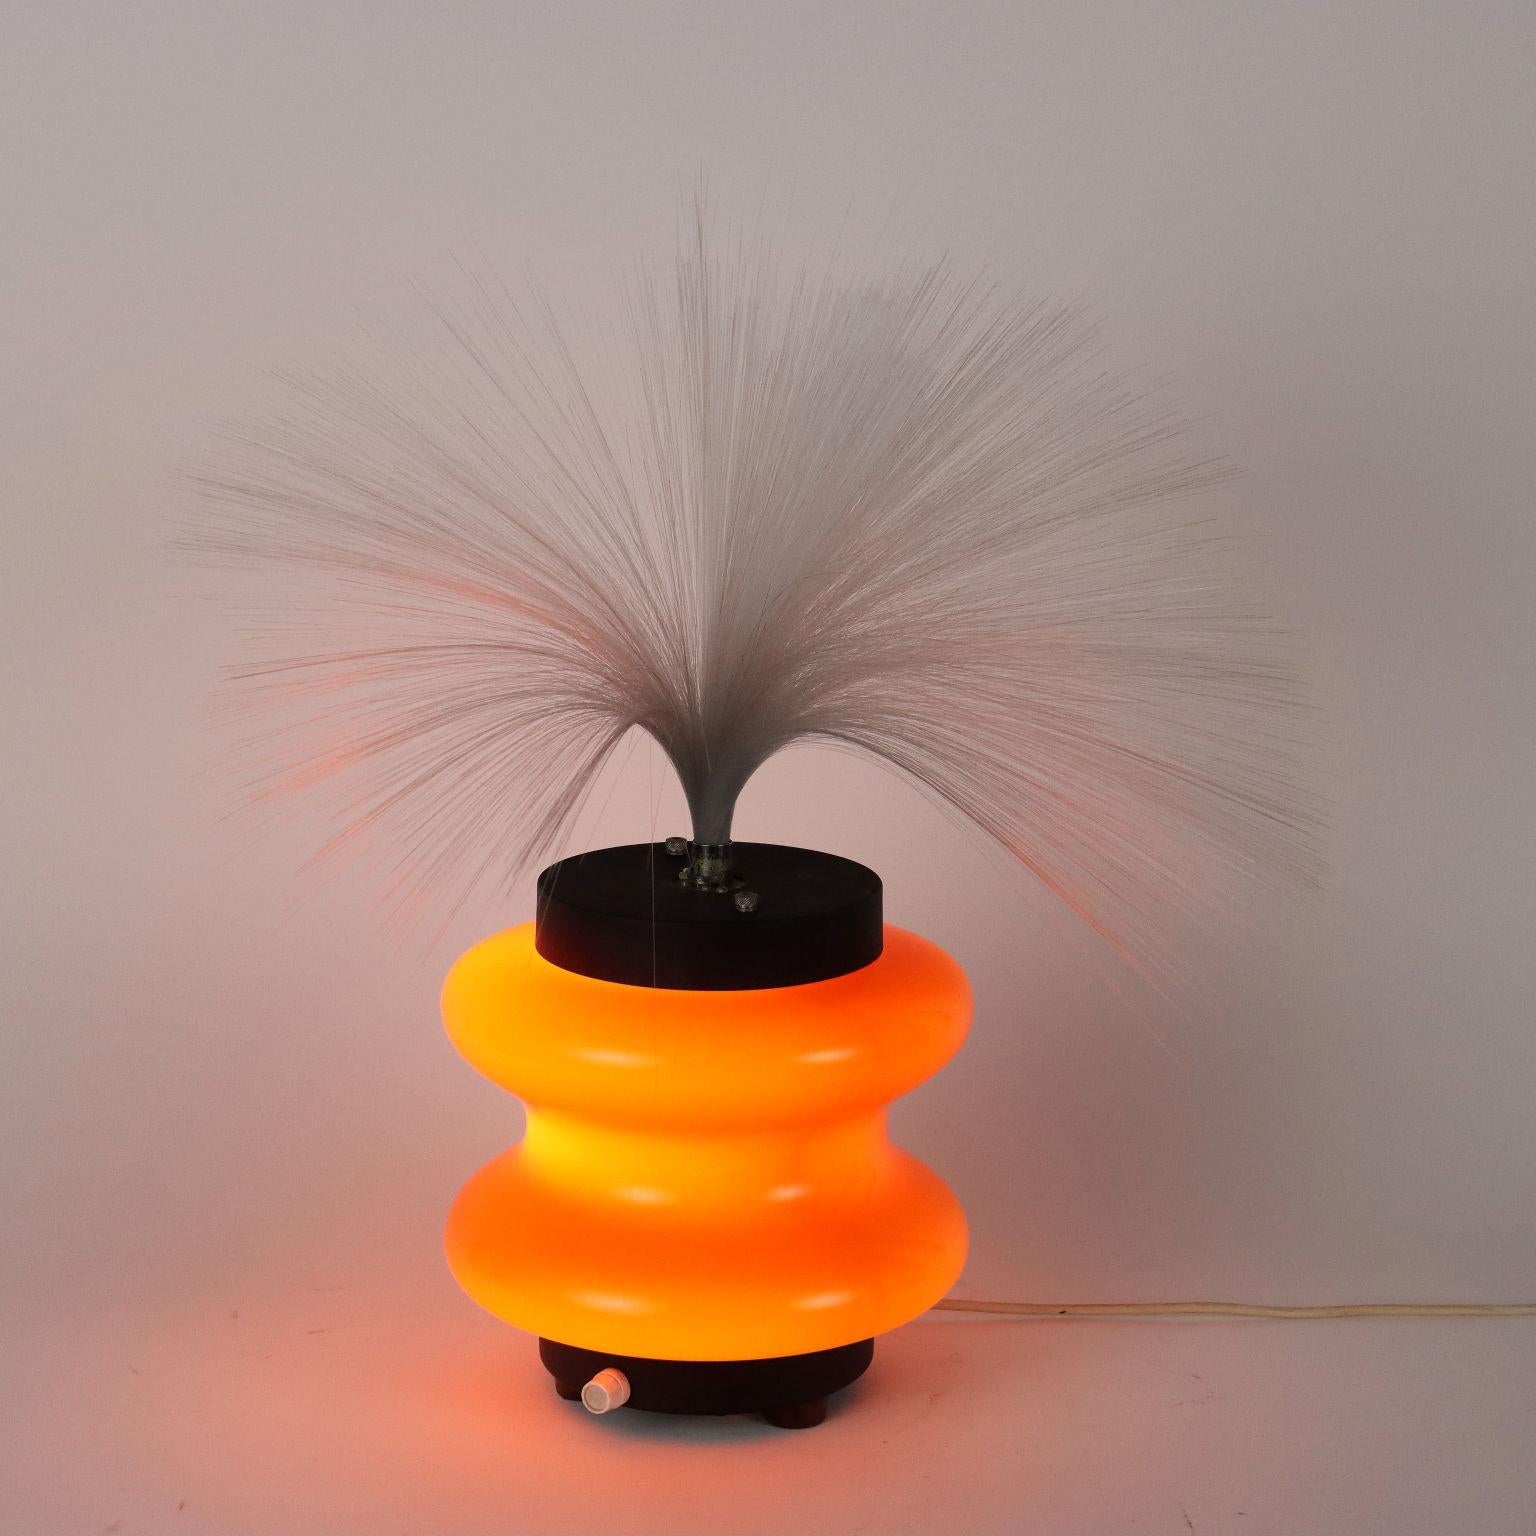 Enamel Lamp with Optical Fibers from the 70s